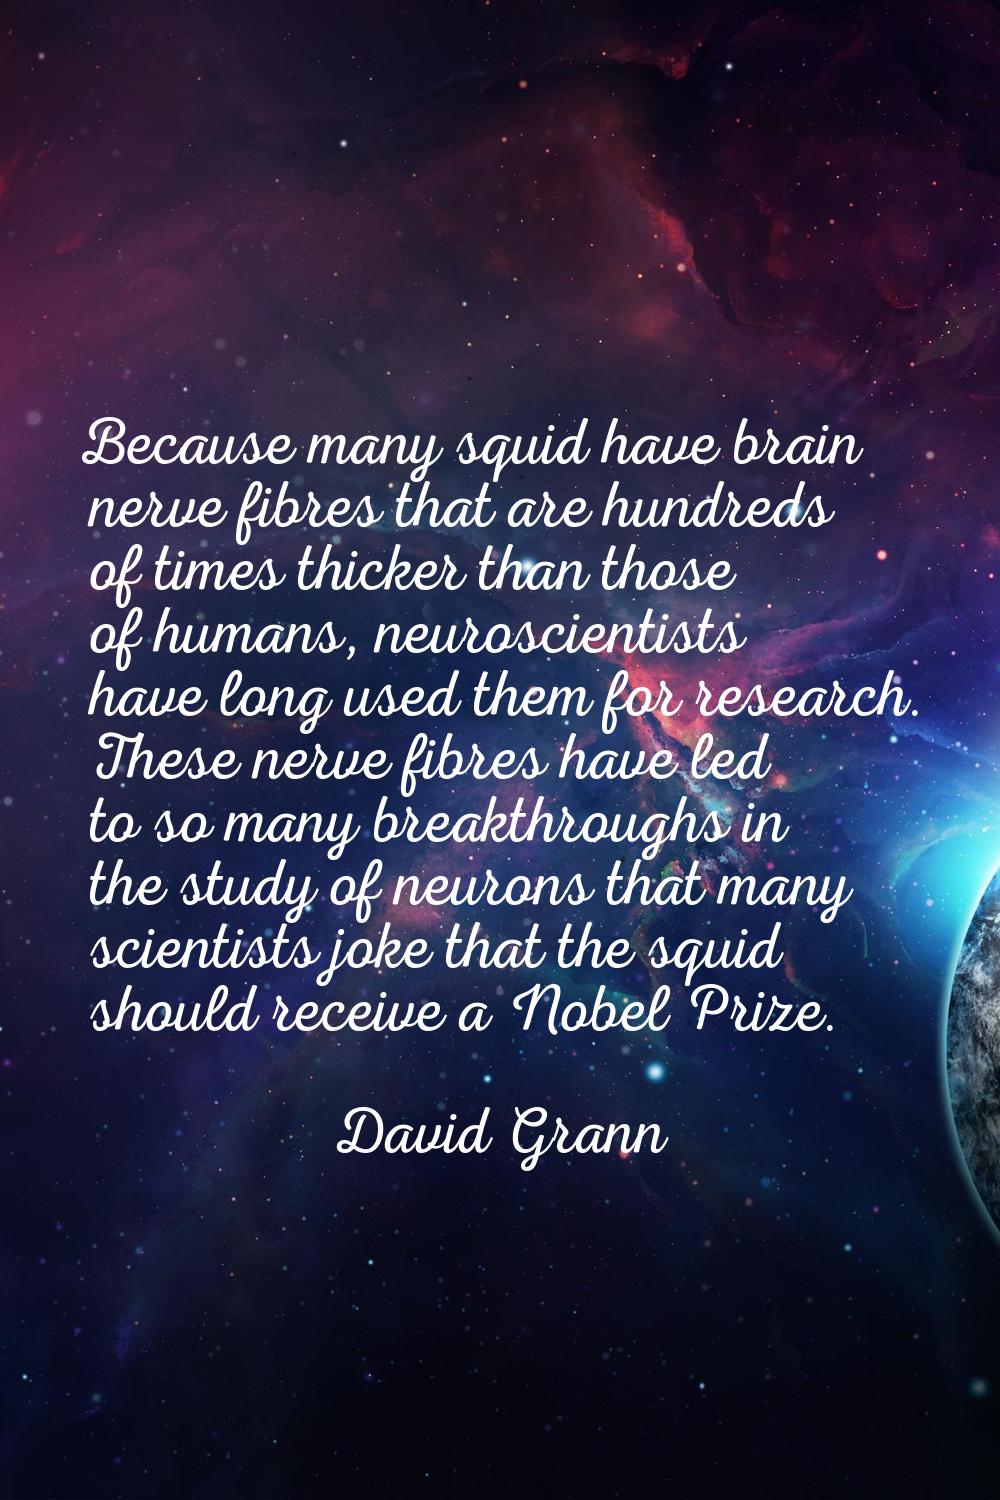 Because many squid have brain nerve fibres that are hundreds of times thicker than those of humans,